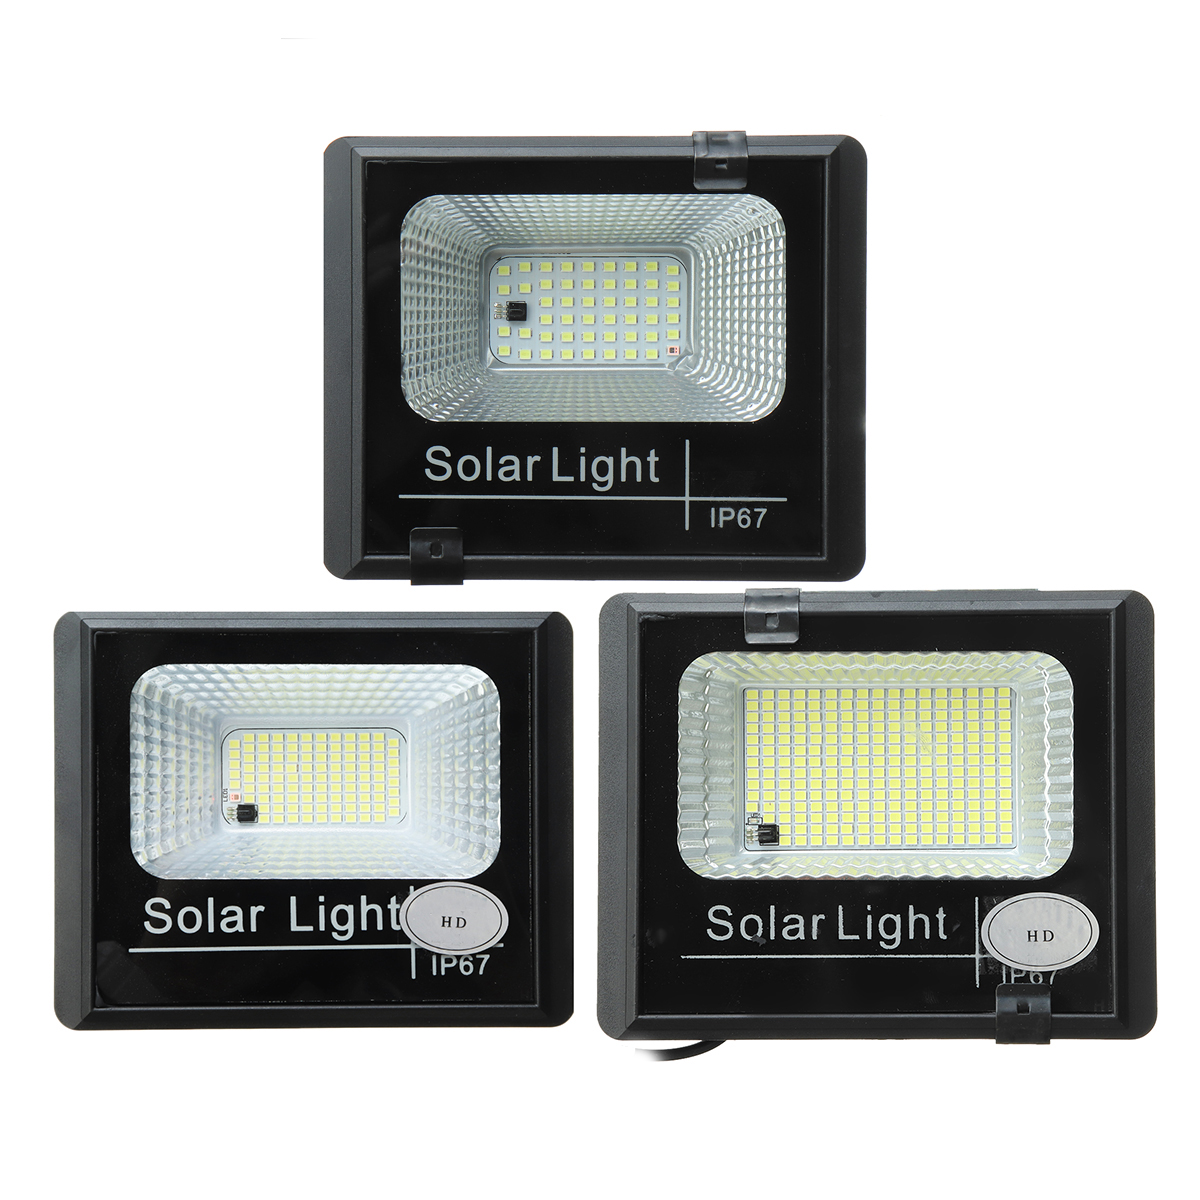 LED-Solar-Flood-Light-with-Remote-Control-Wall-Lamp-IP67-Waterproof-Solar-Powered-Lamp-for-Outdoor-G-1880477-10